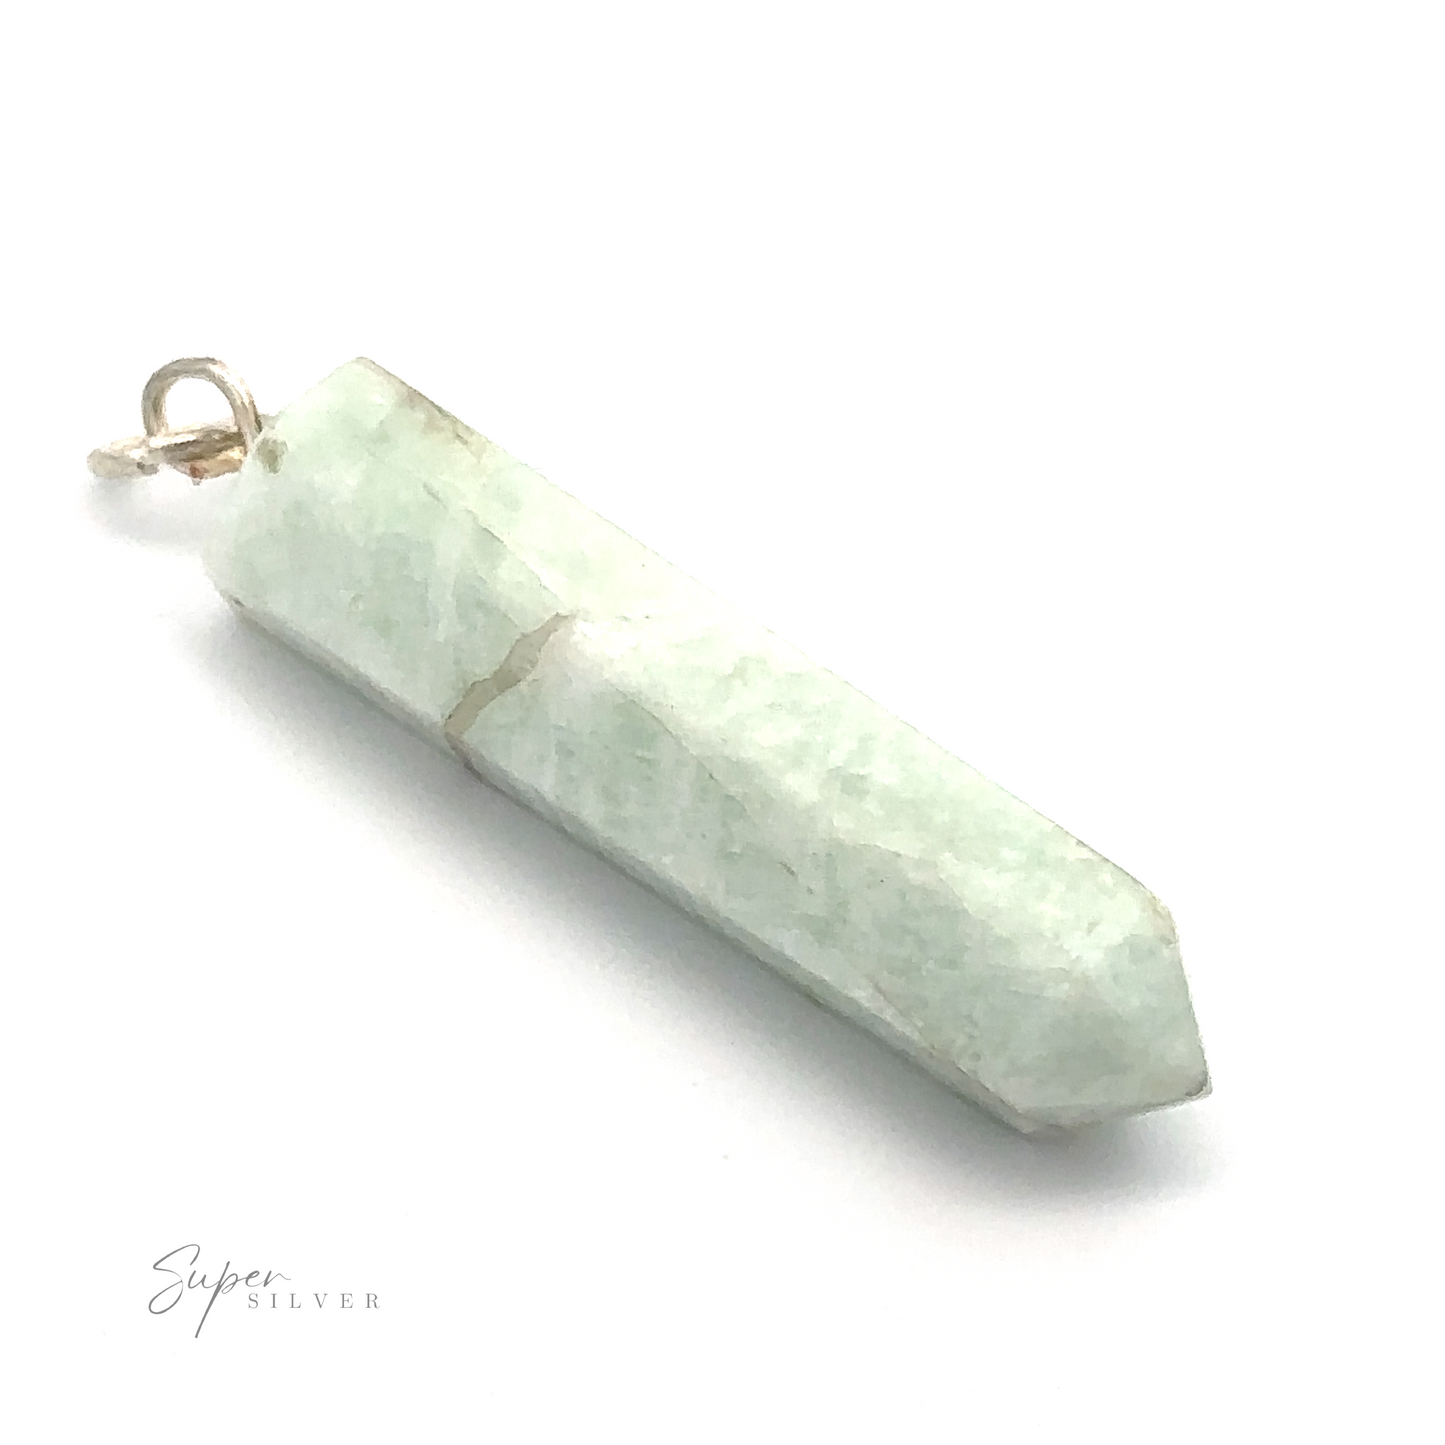 
                  
                    A pale green, double-terminated stone pendant with a silver loop for attaching to a chain, set against a white background. The raw obelisk shape lends an earthy feel. "Raw Stone Obelisk Pendant" is faintly visible in the bottom corner, highlighting the mixed metals craftsmanship.
                  
                